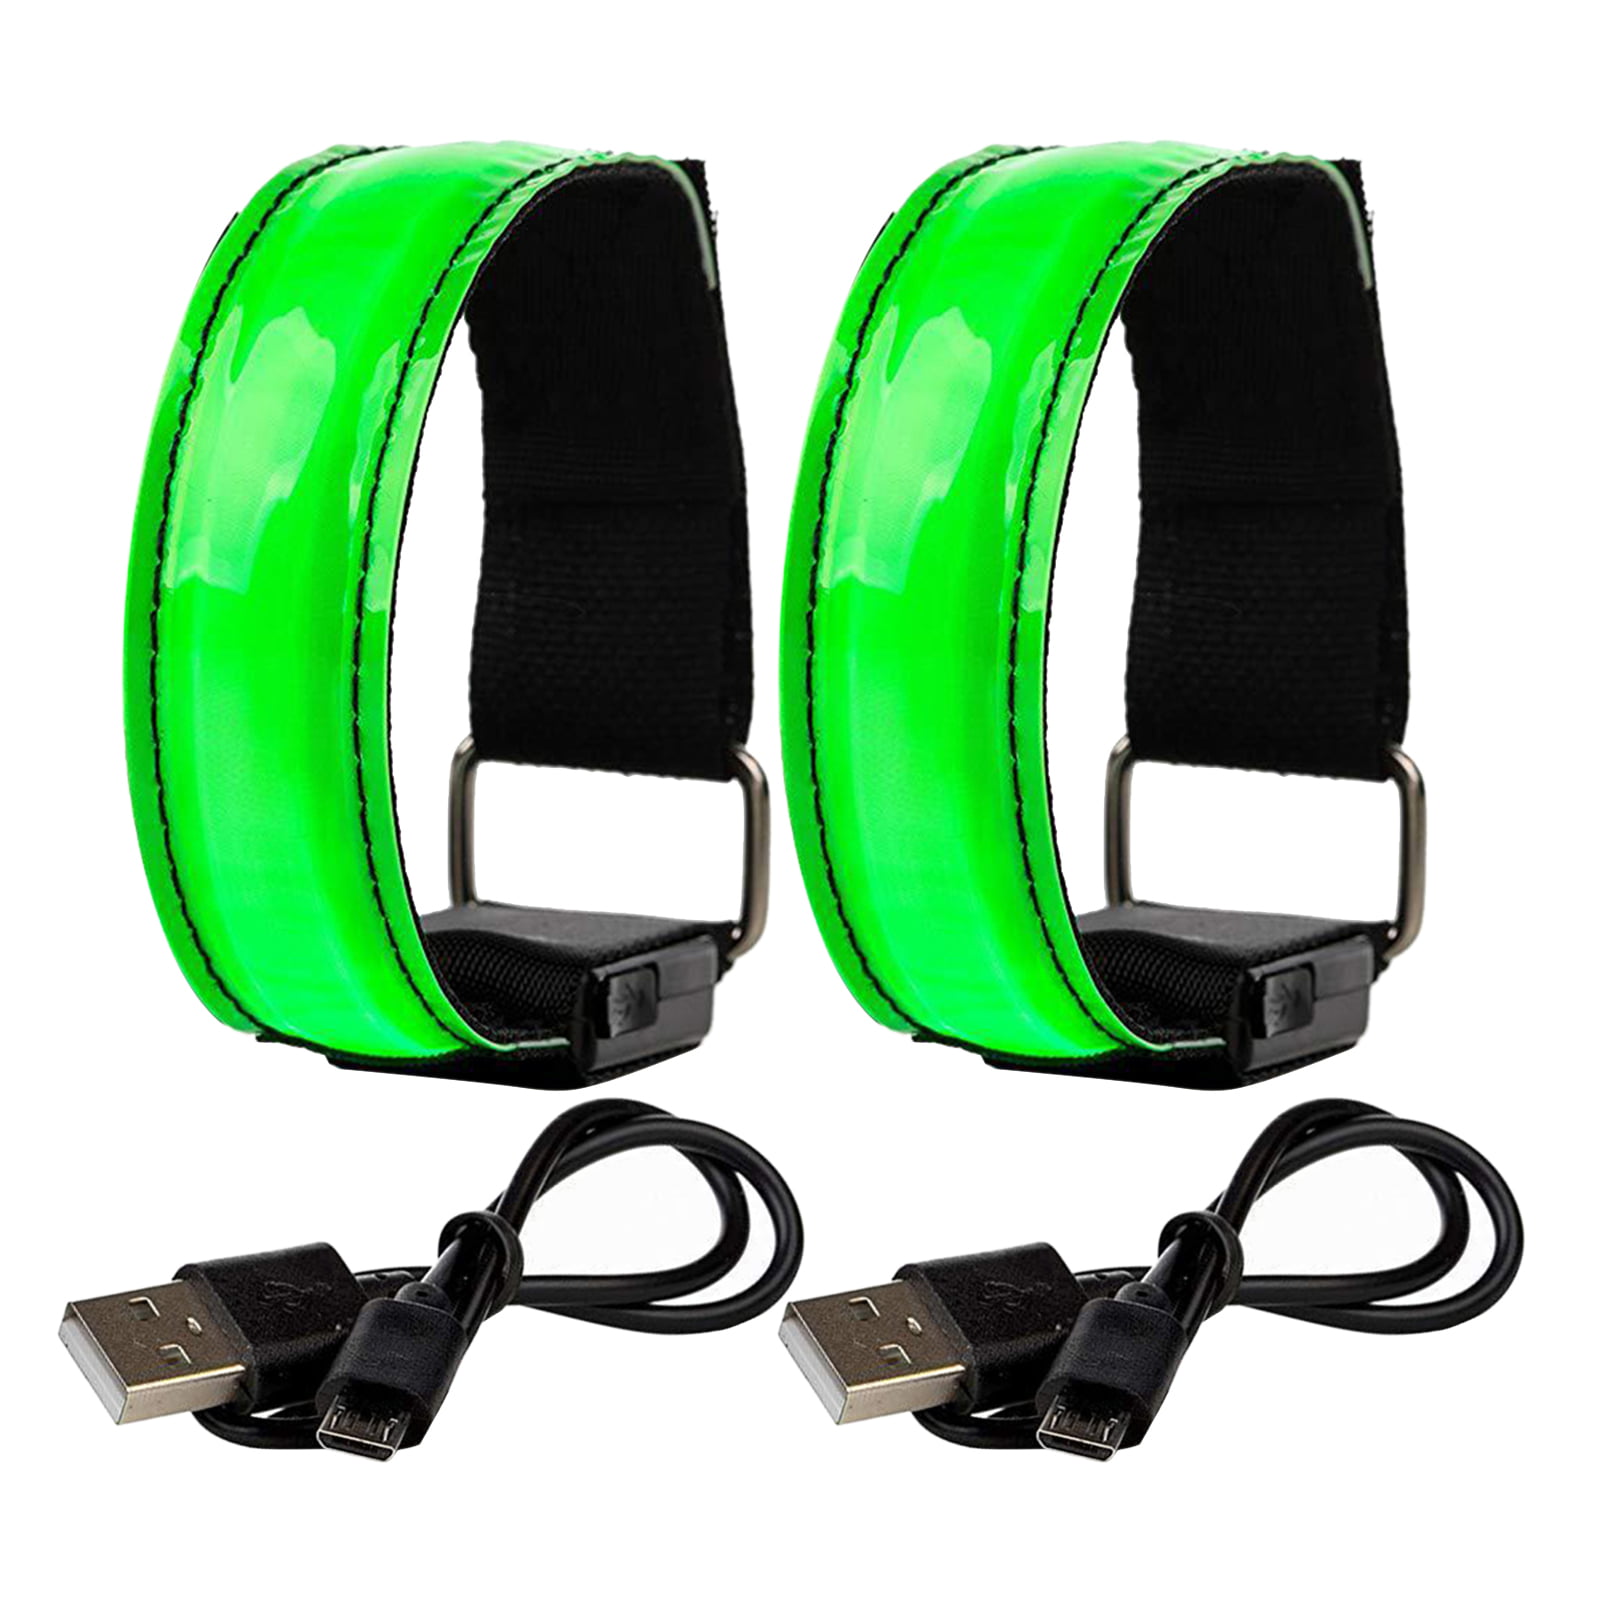 Details about   LED Flashing Light Warning Reflective Running Hand Strap Arm Band Sports Jogging 